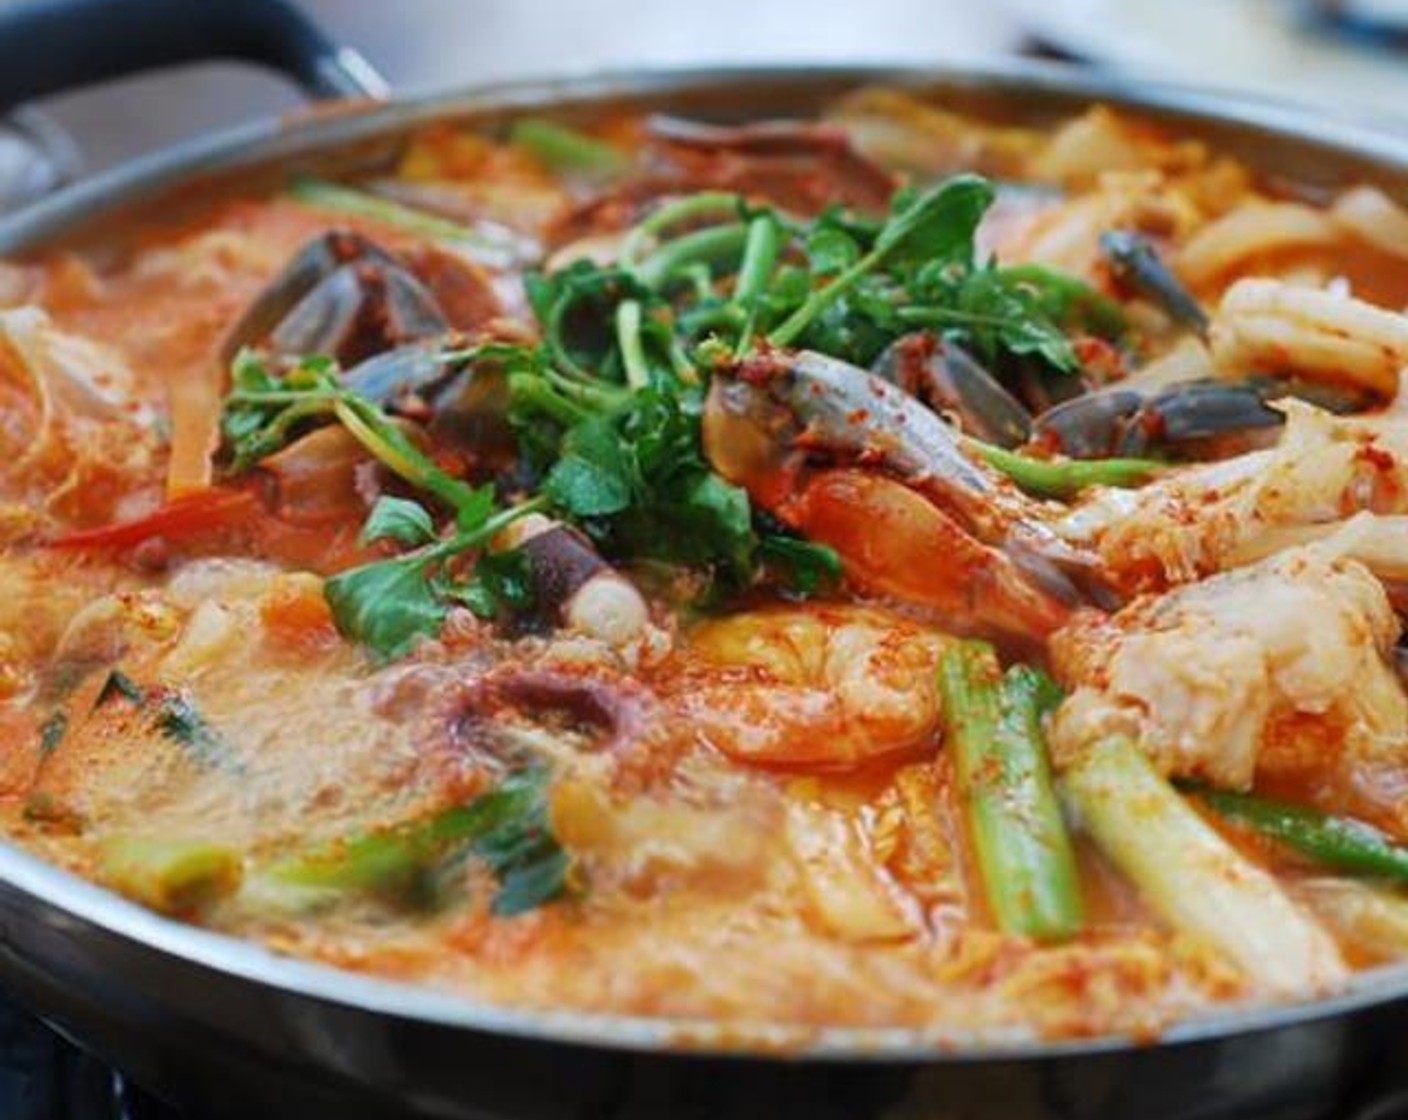 Haemul Jeongol (Spicy Seafood Hot Pot)